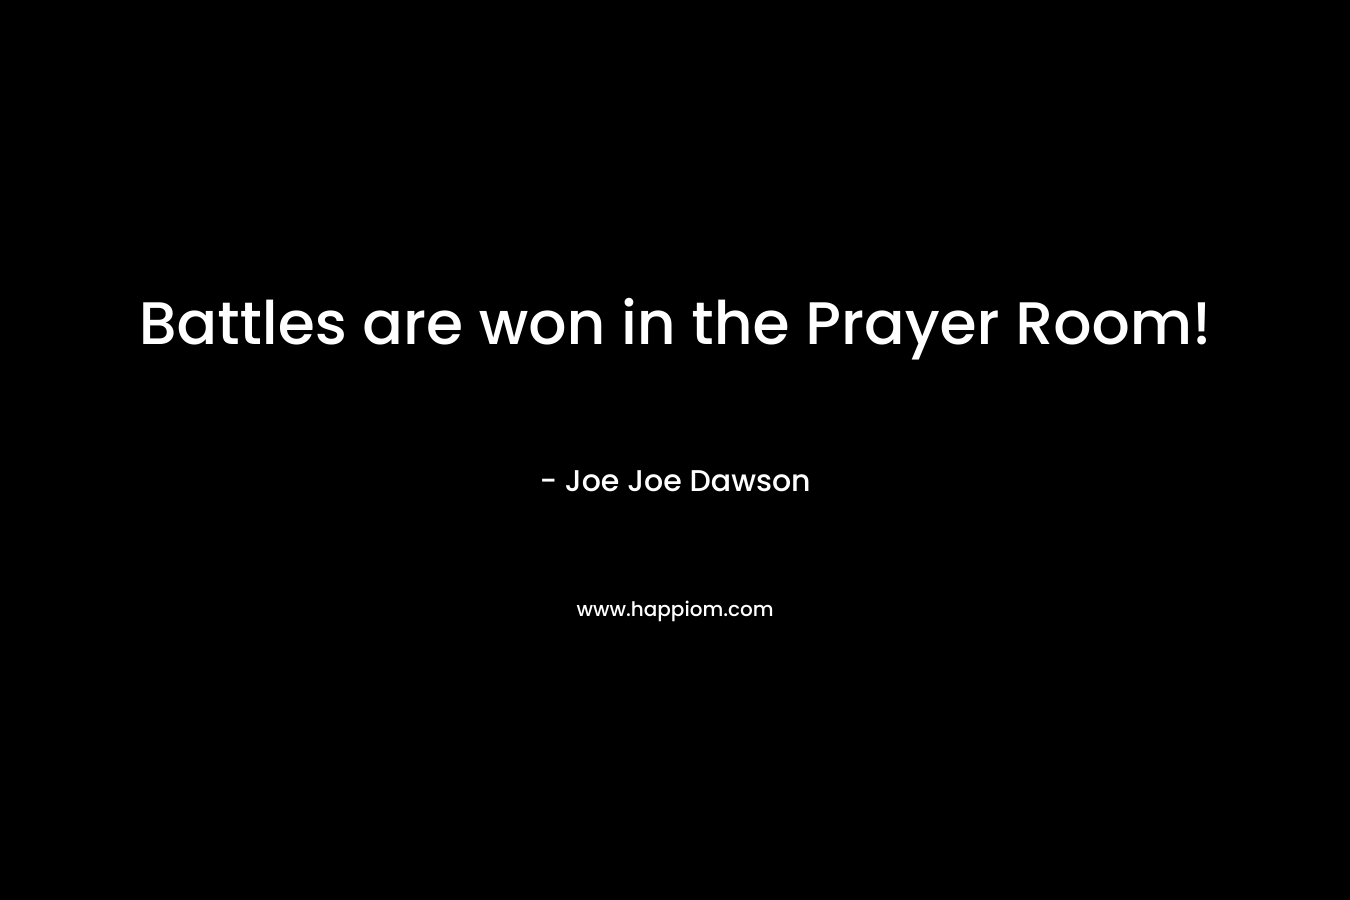 Battles are won in the Prayer Room!